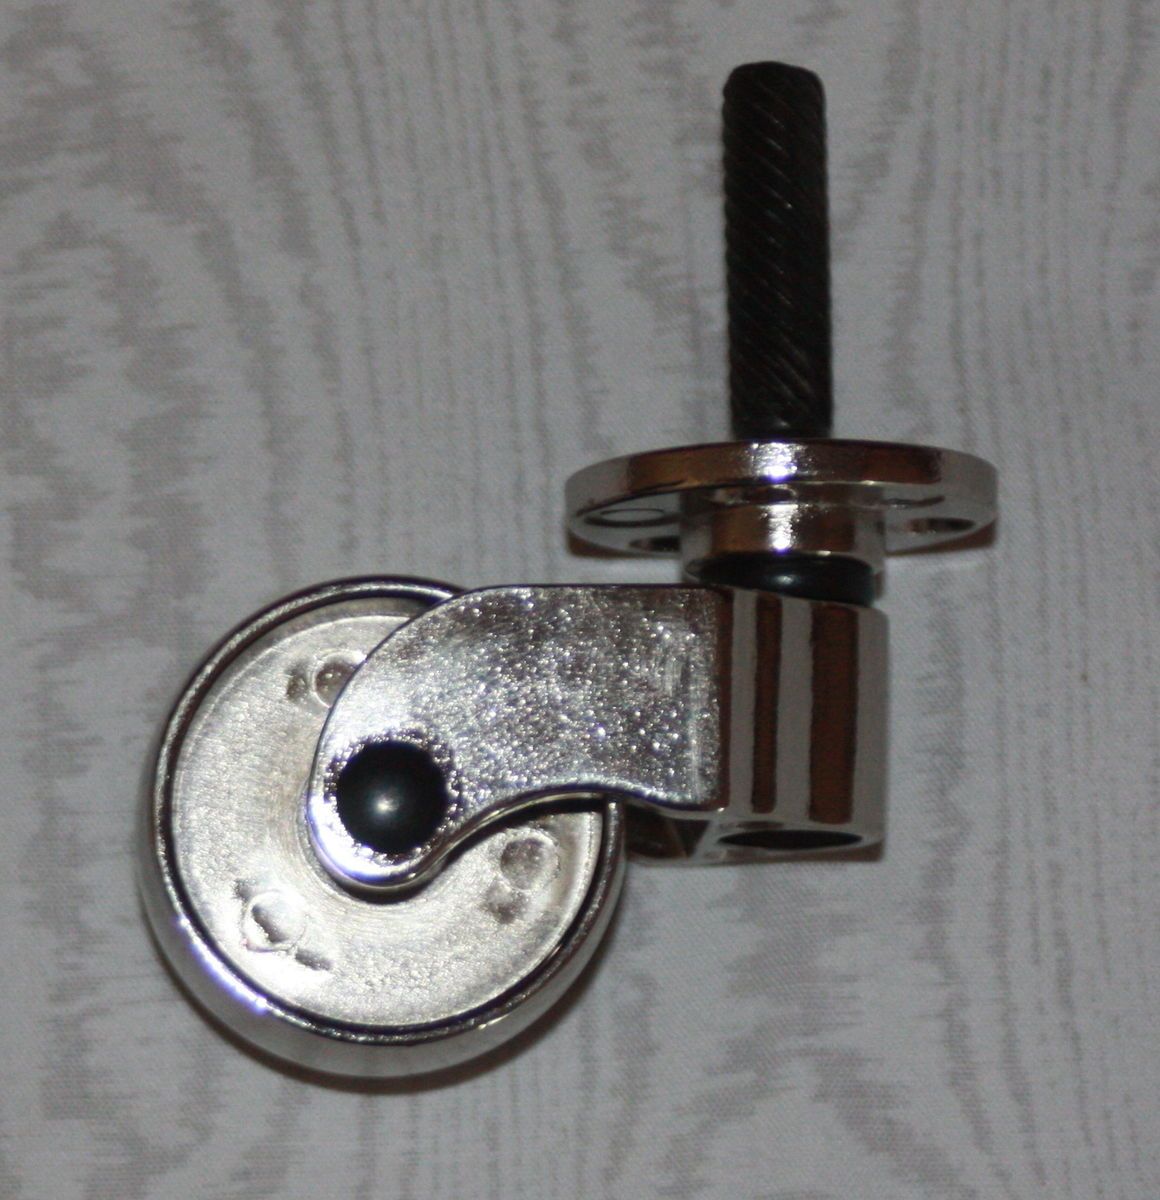 New Long Stem Furniture Casters with Polished Nickel Finish